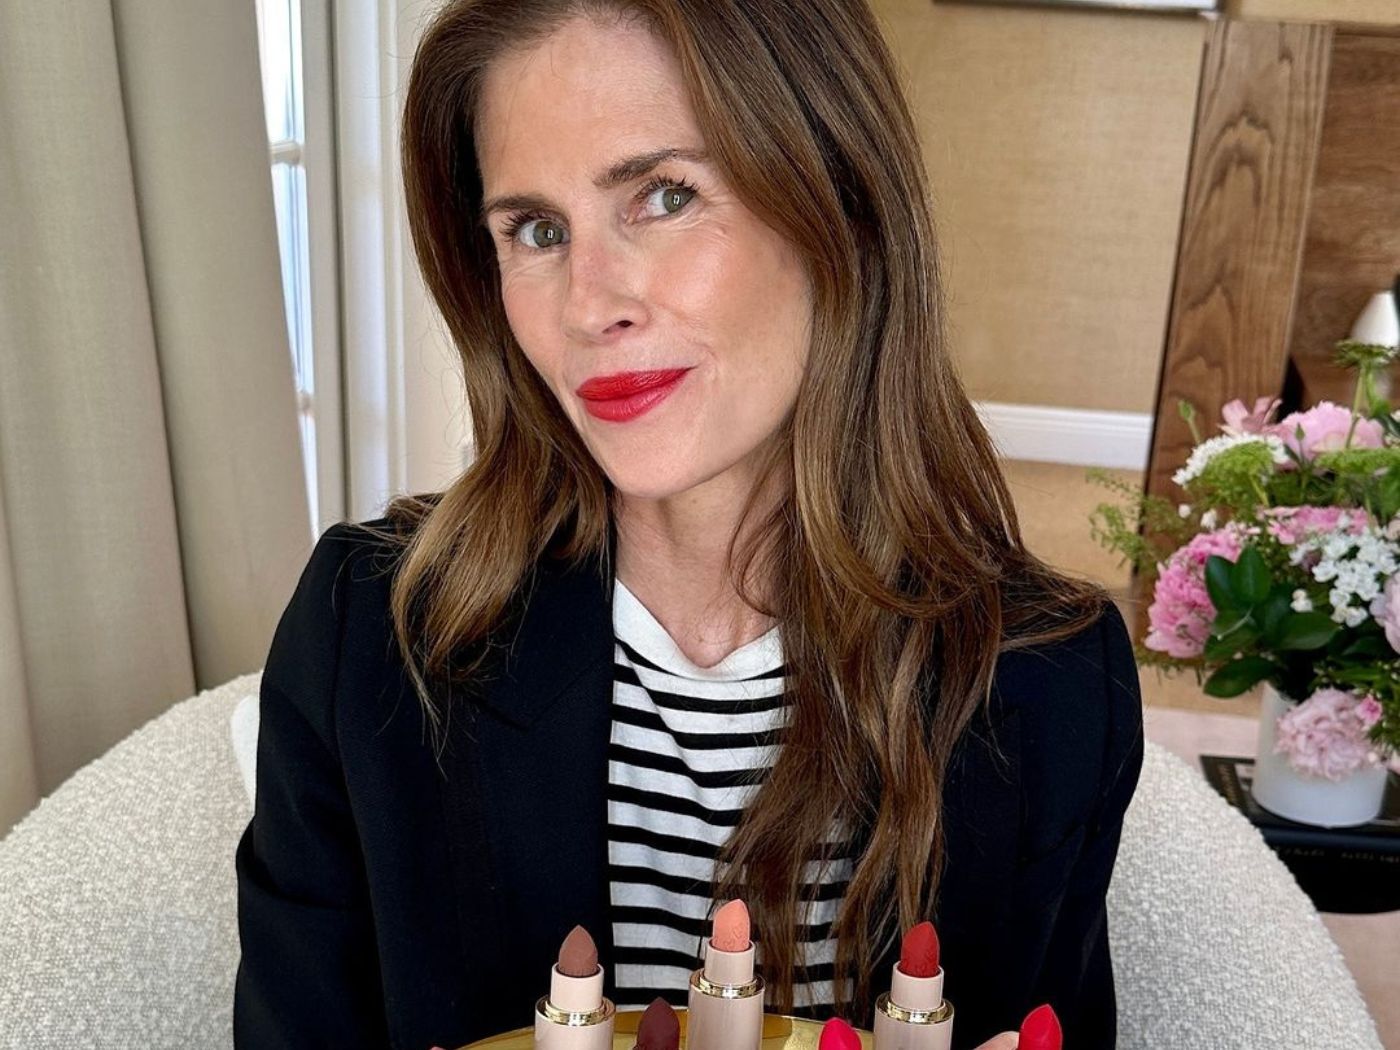 Woman in black blazer and striped black and white t shirt wearing red lipstick, seated holding a tray of oversized lipsticks in different shades.